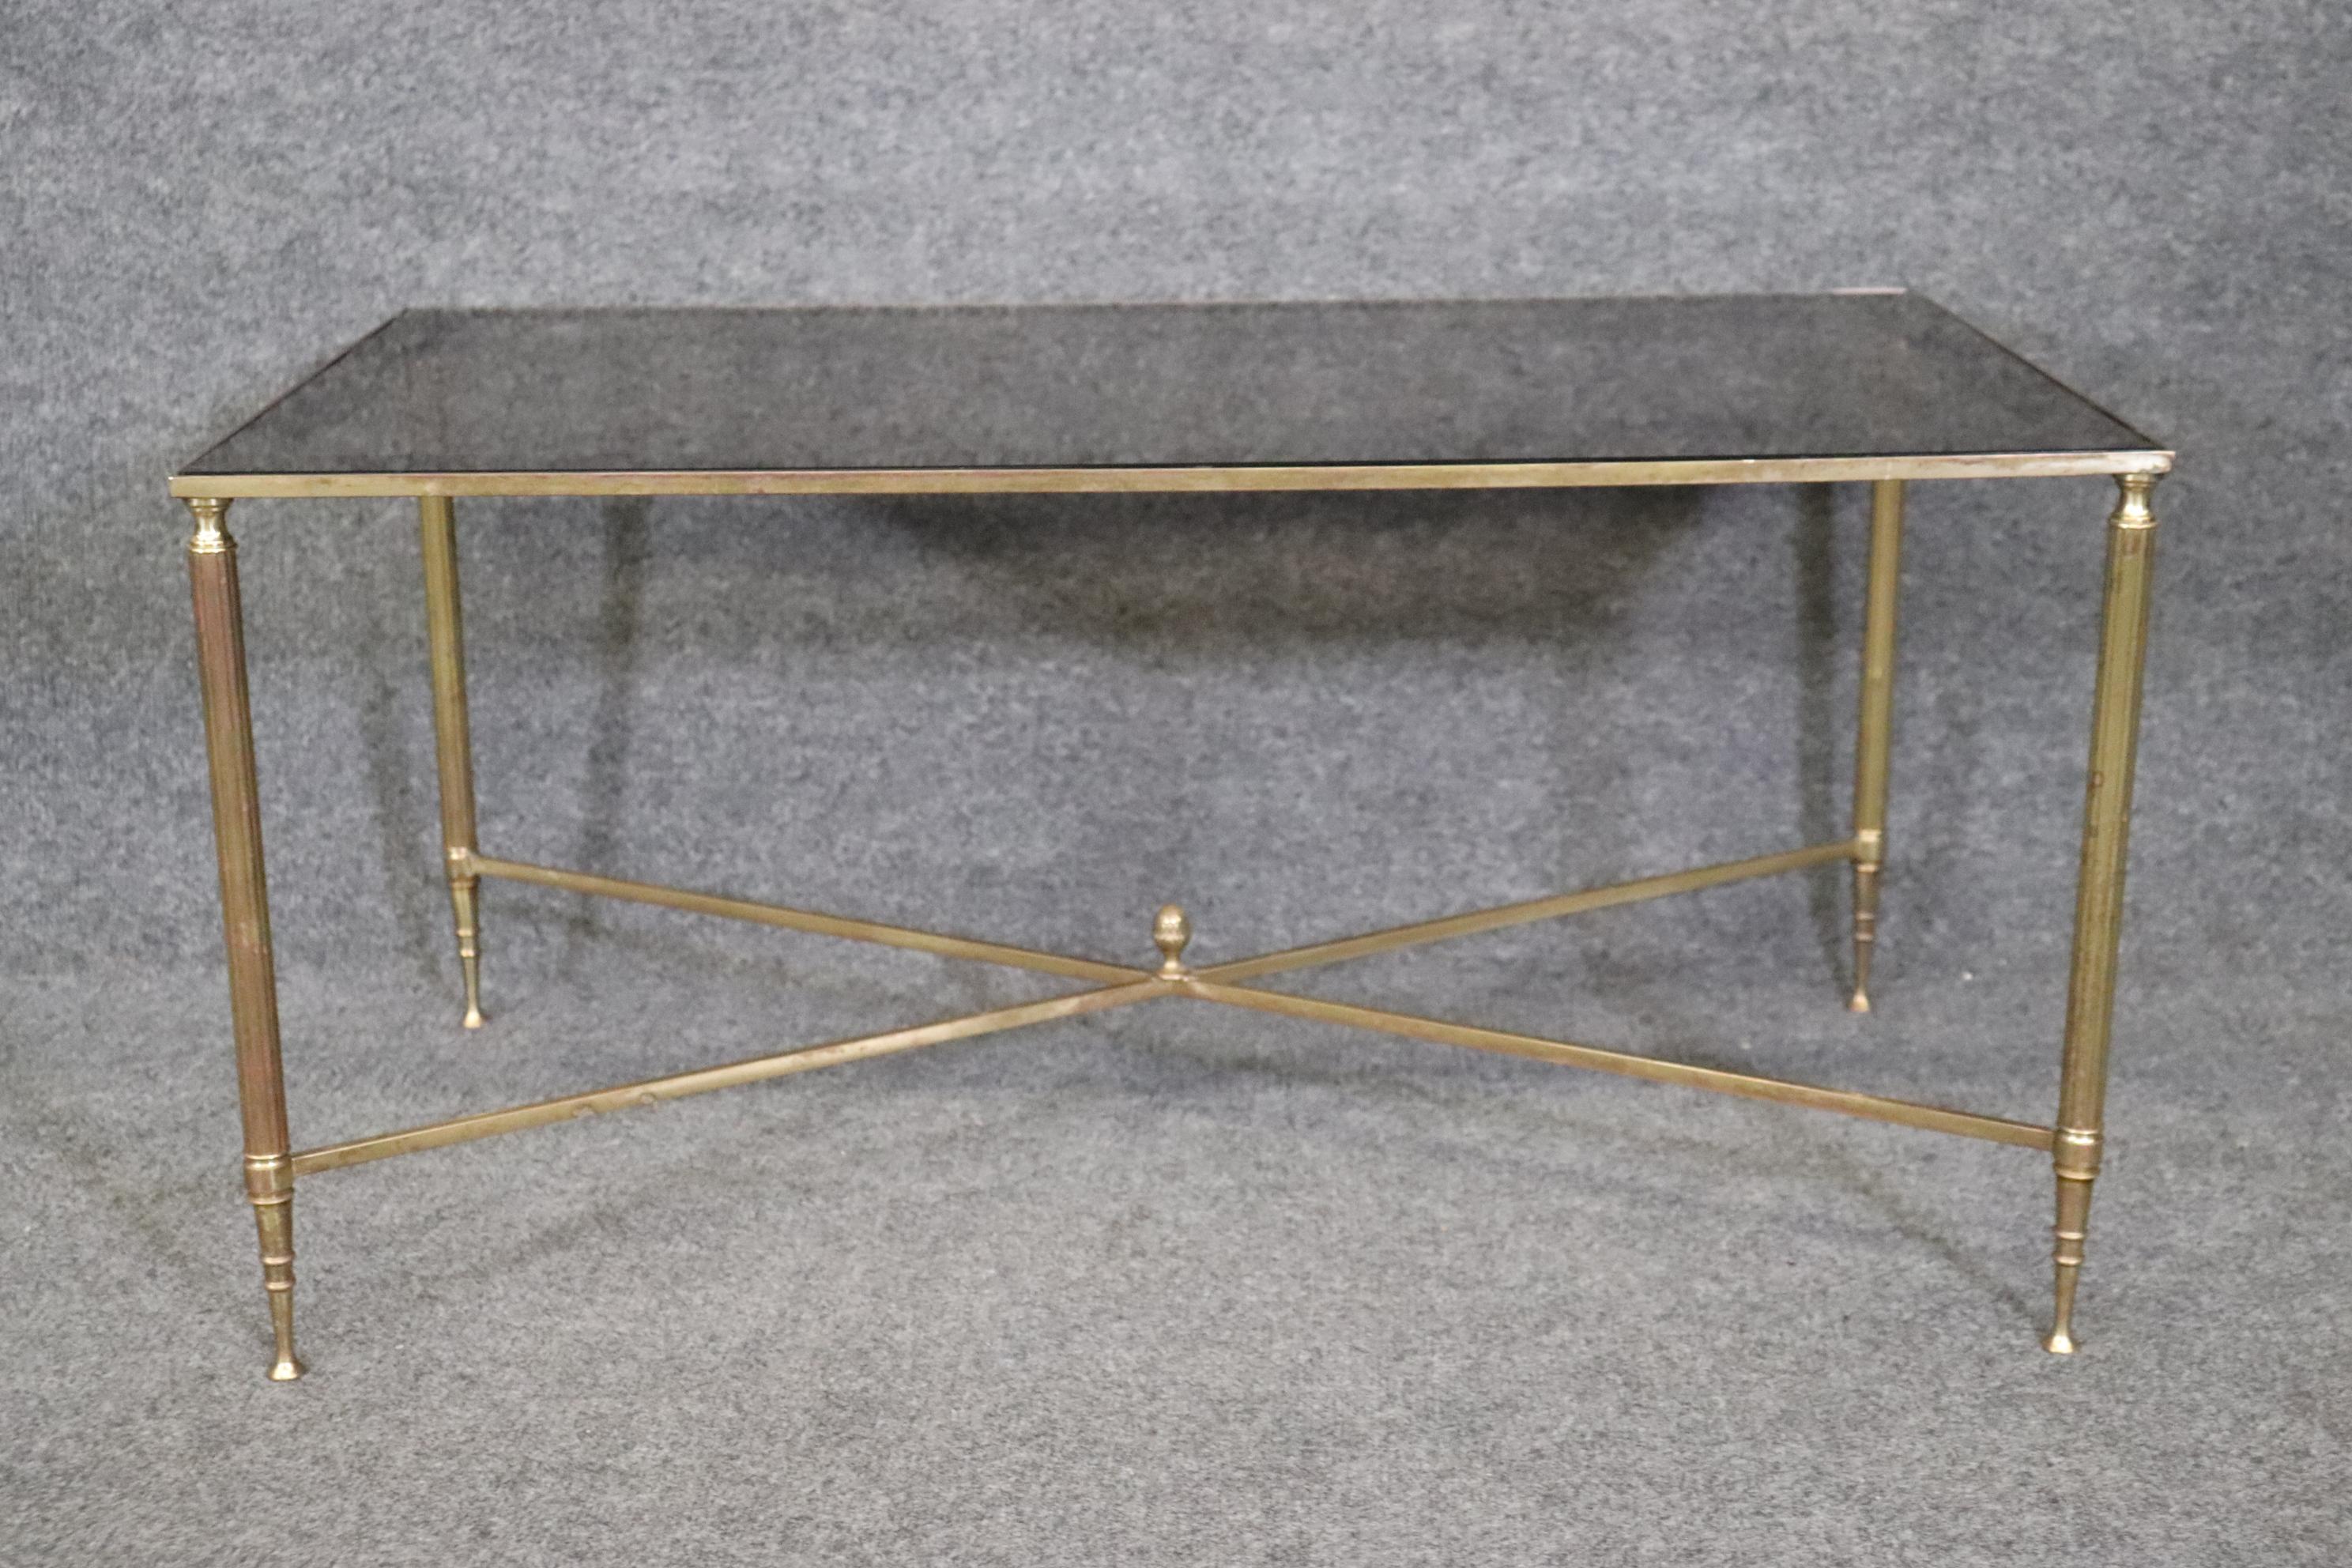 Cast French Regency Style Brass Glass Top Coffee Table attributed to Maison Jansen